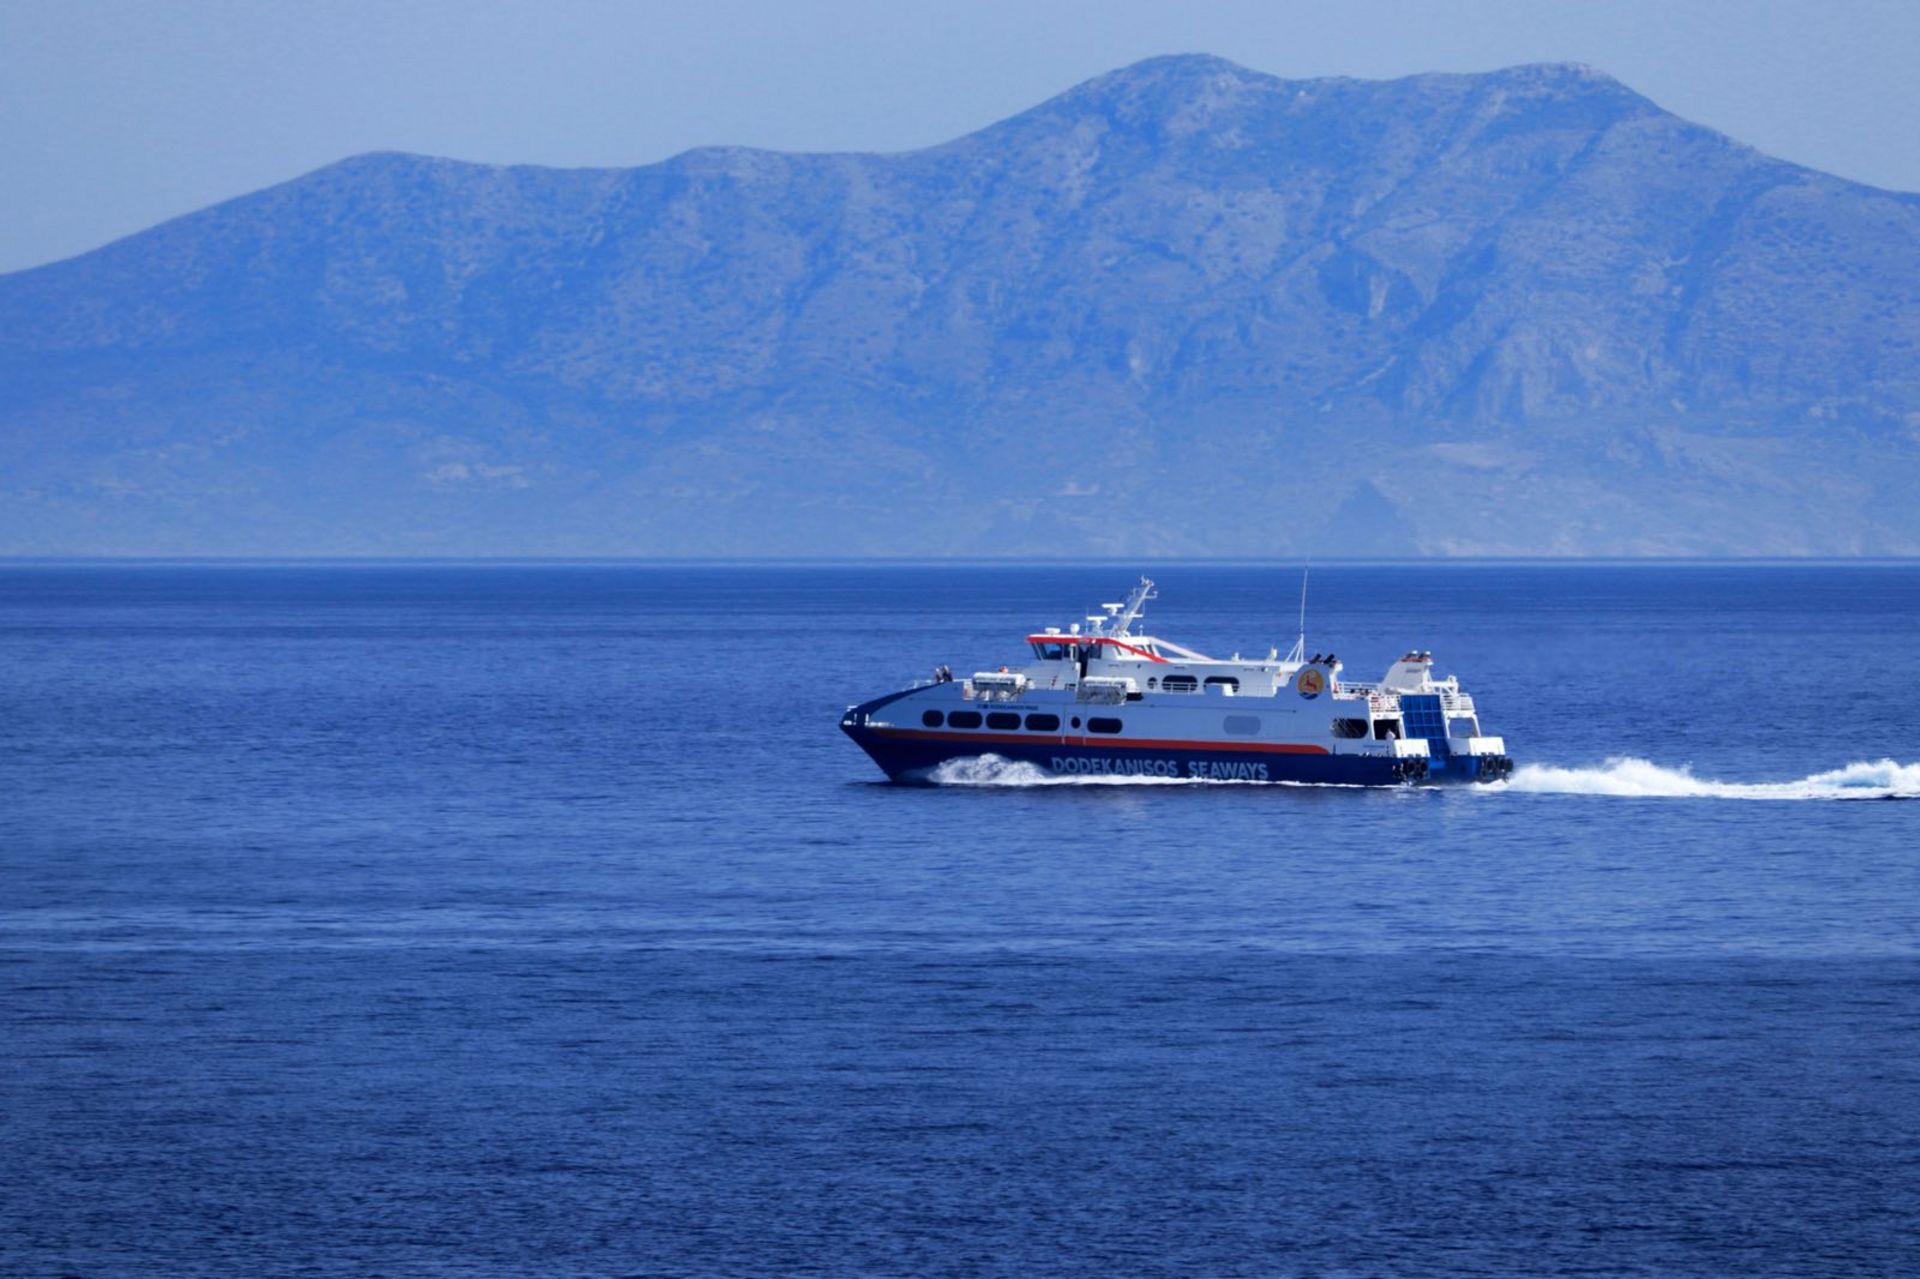 Modification of itineraries 04/11 to 08/11 from Kos, Kalymnos, Leros to Panormitis